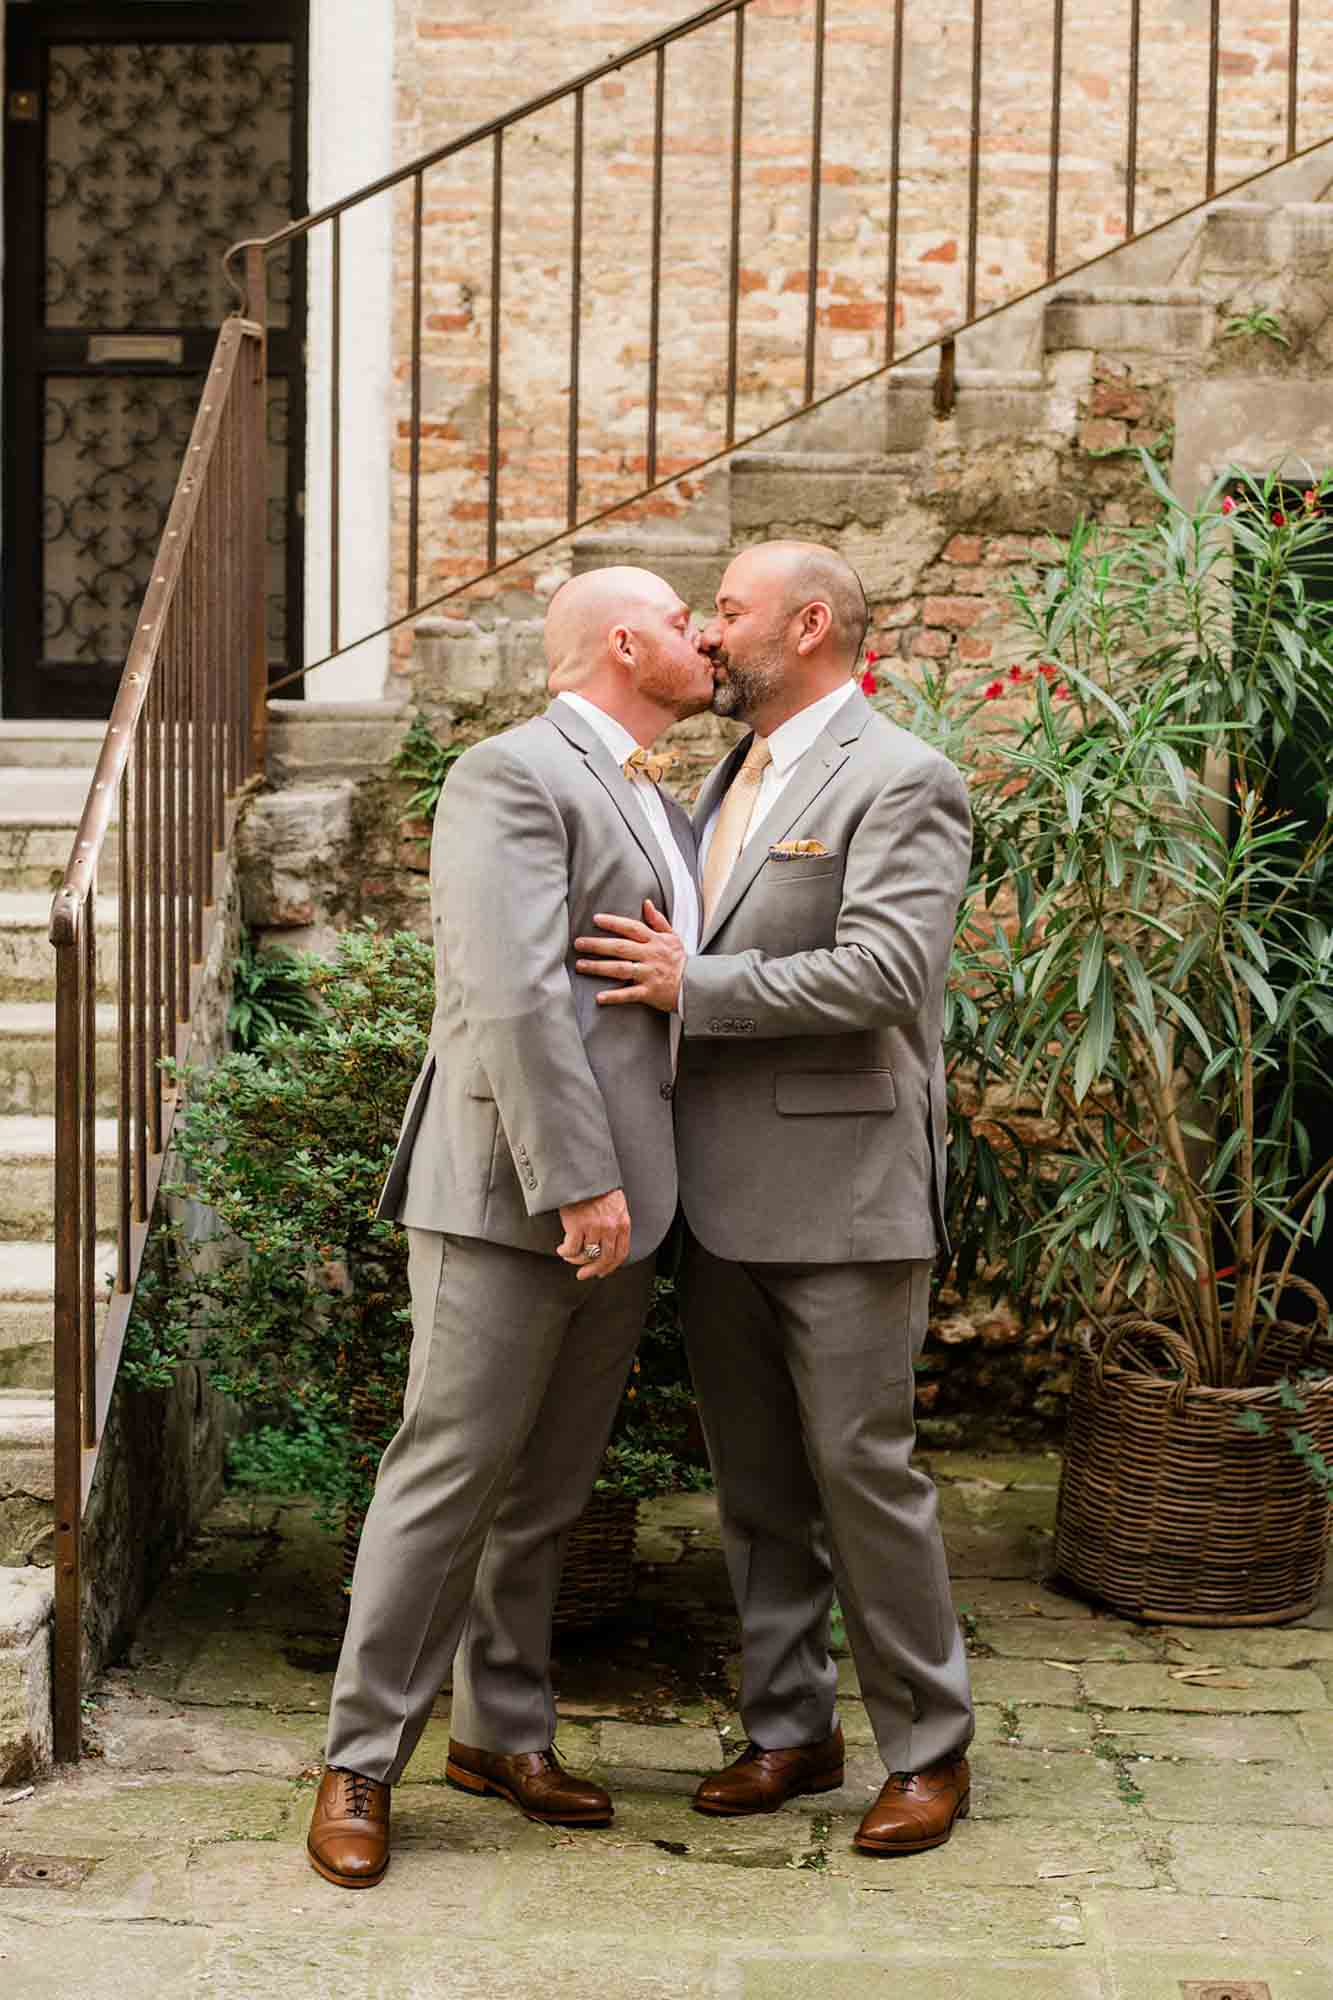 Emotional surprise elopement in Venice | ManiSol Wedding Photography and Videography | Featured on Equally Wed, the leading LGBTQ+ wedding magazine